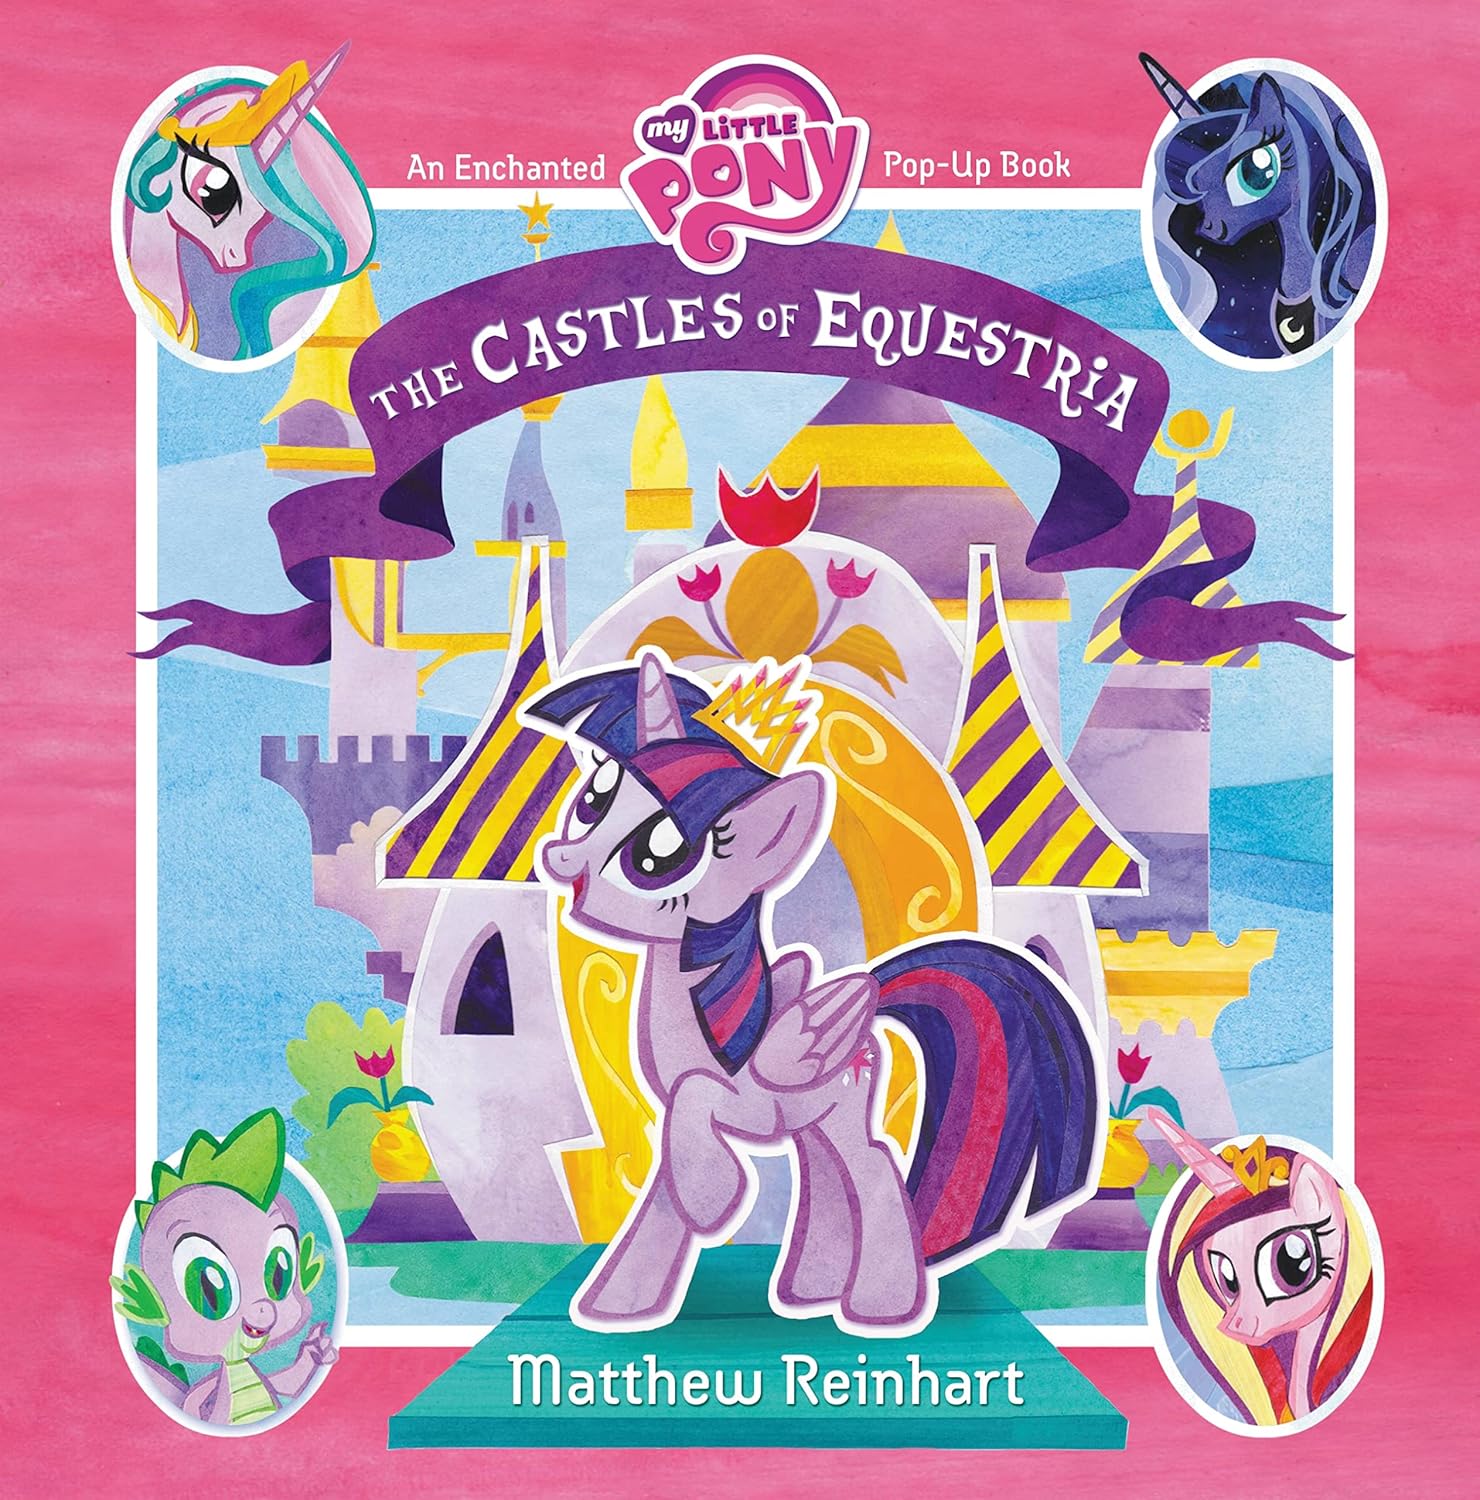 MLP The Castles of Equestria: An Enchanted Pop-Up Book